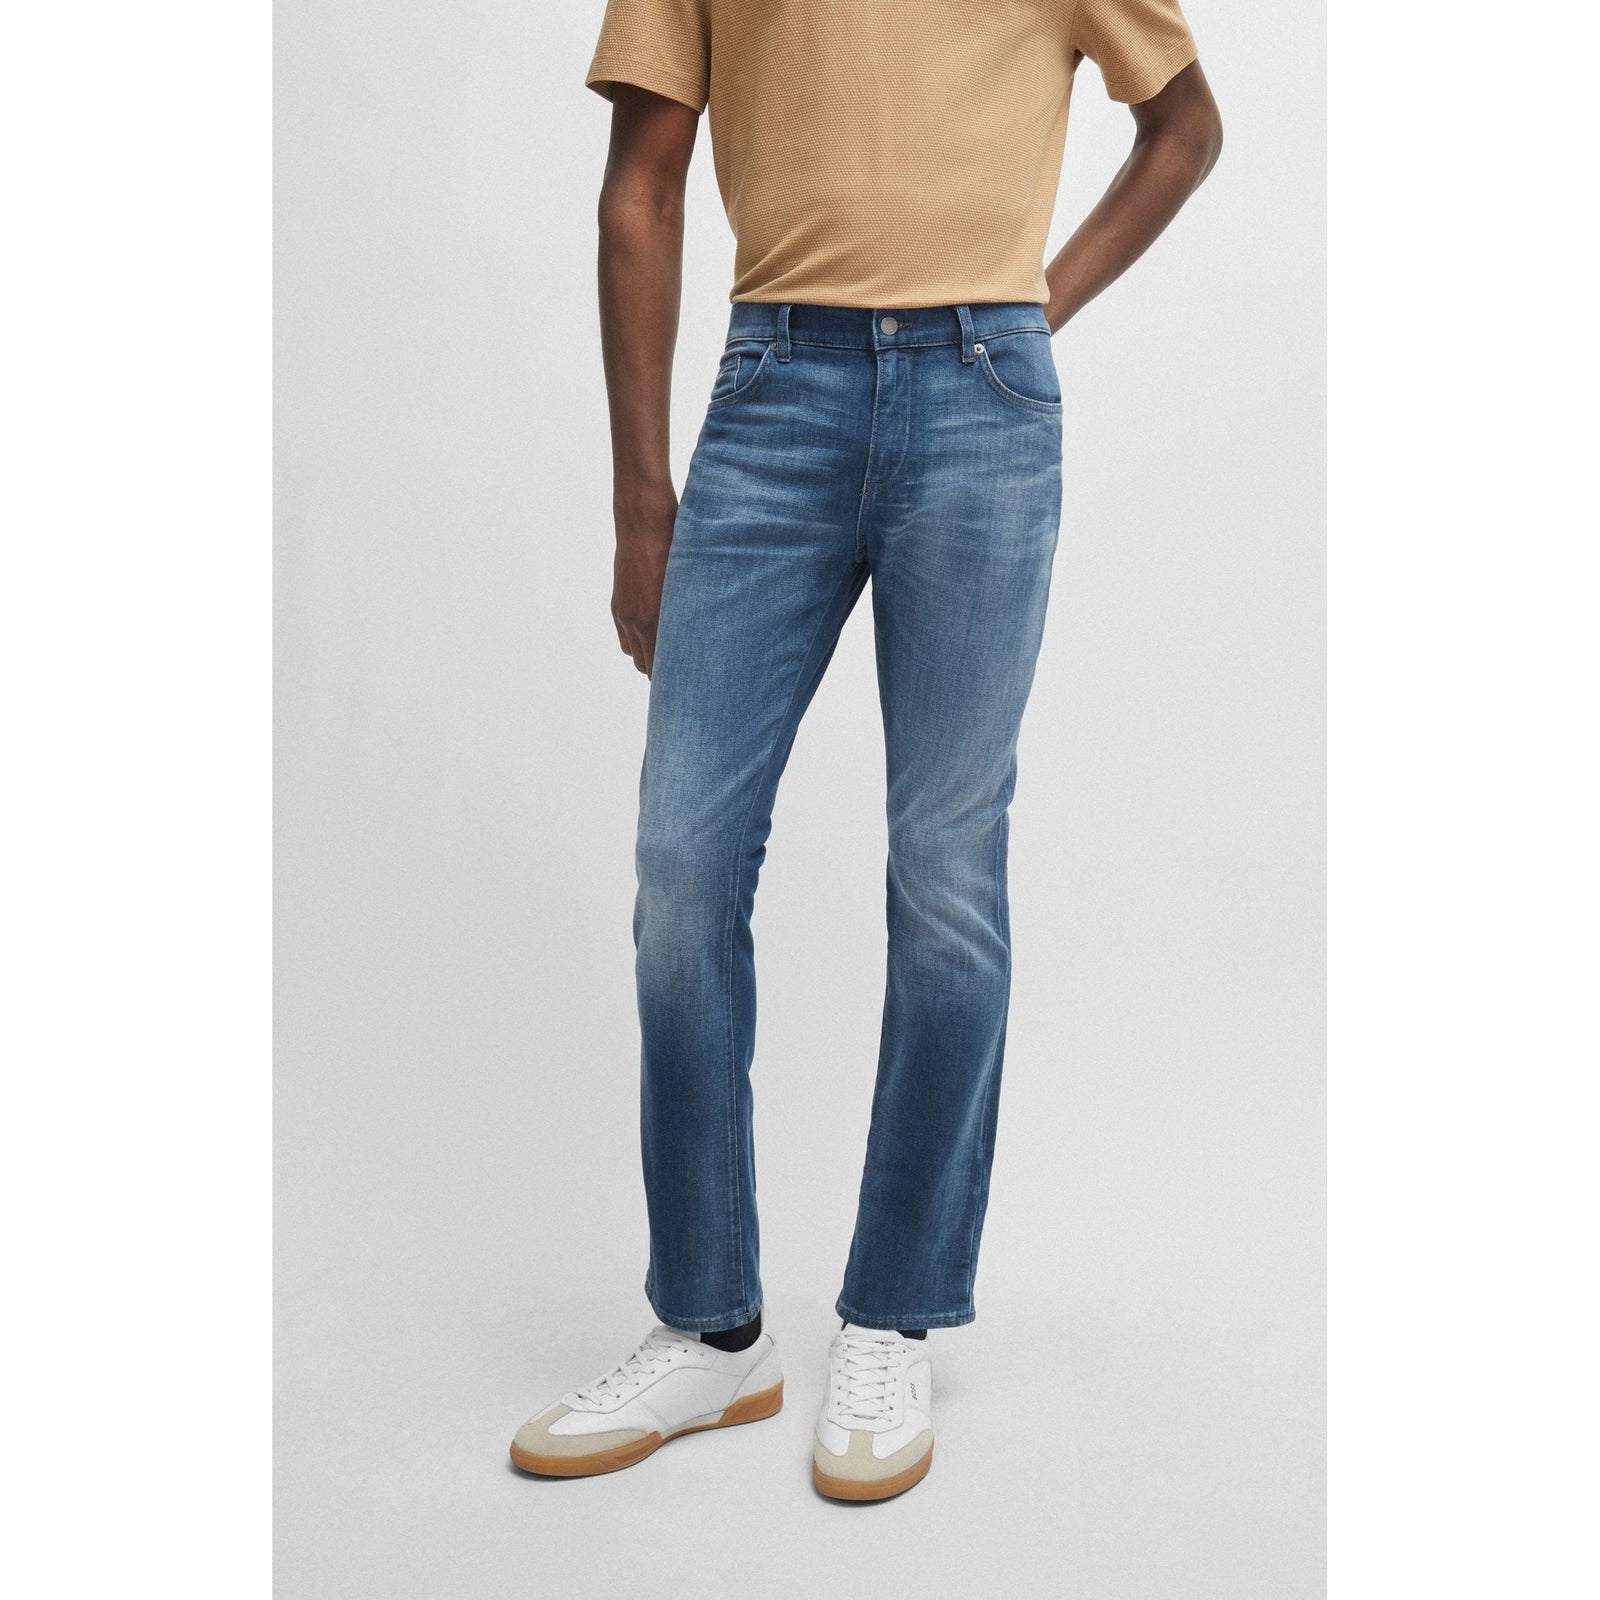 BOSS SLIM-FIT JEANS IN BLUE ITALIAN CASHMERE-TOUCH DENIM - Yooto